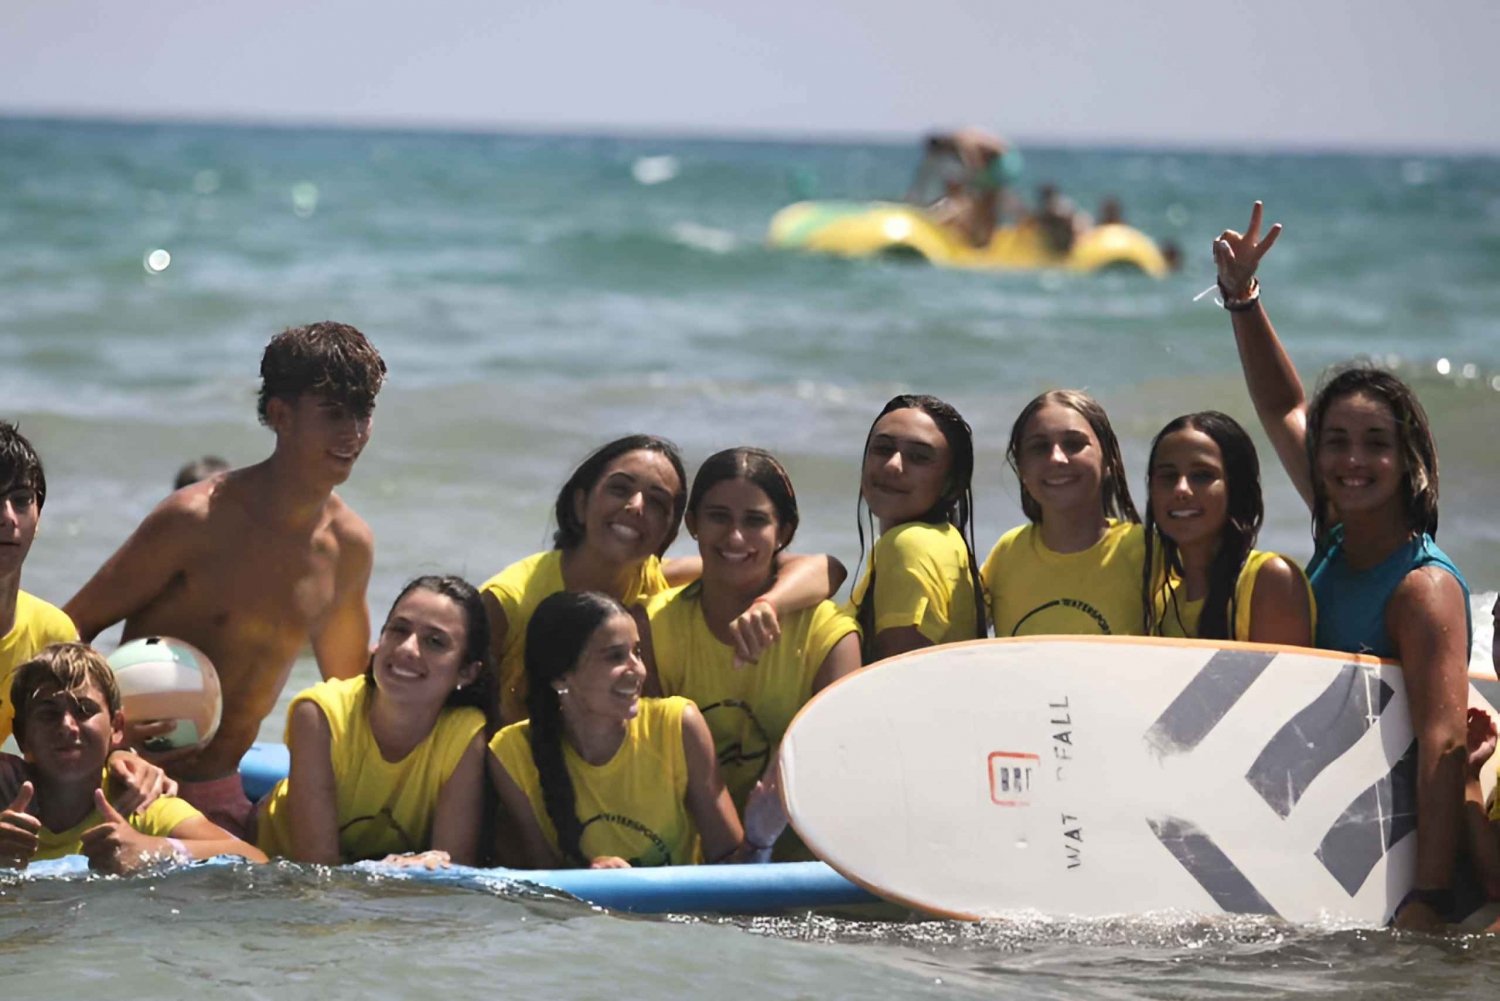 INTRODUCTION TO SURFING COURSE